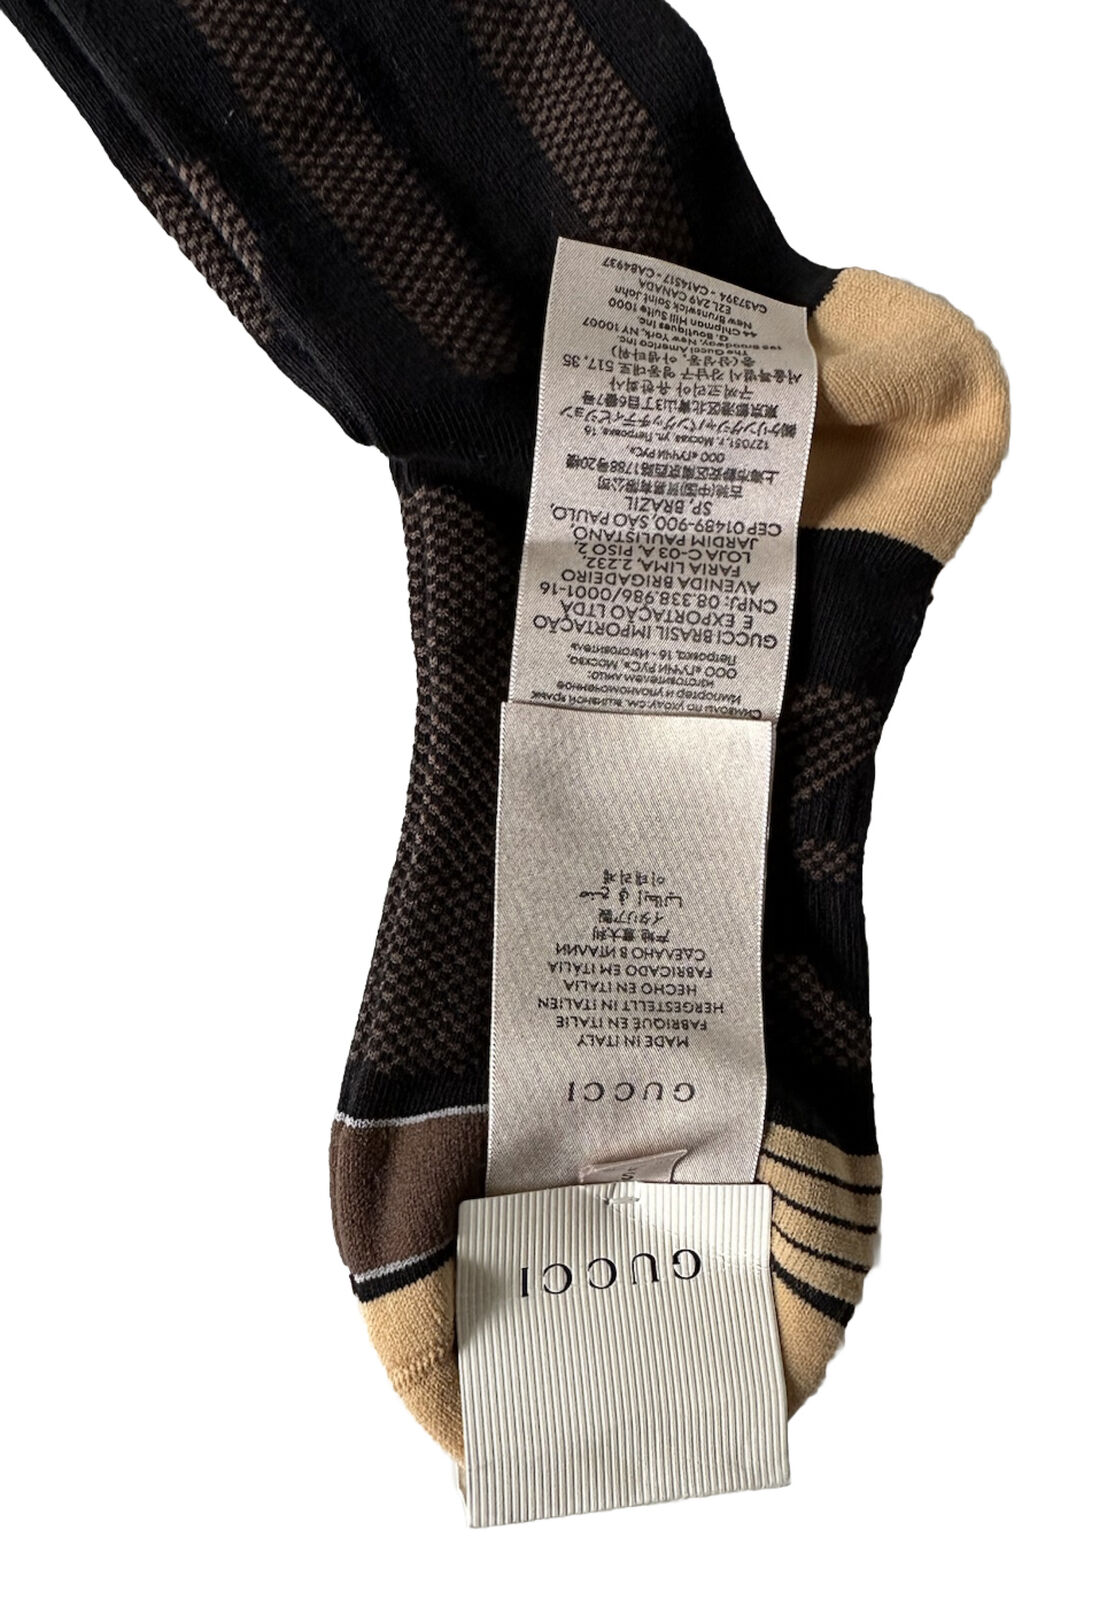 NWT Gucci GG Black/Beige Socks Size M (24-26 cm) Made in Italy 675854